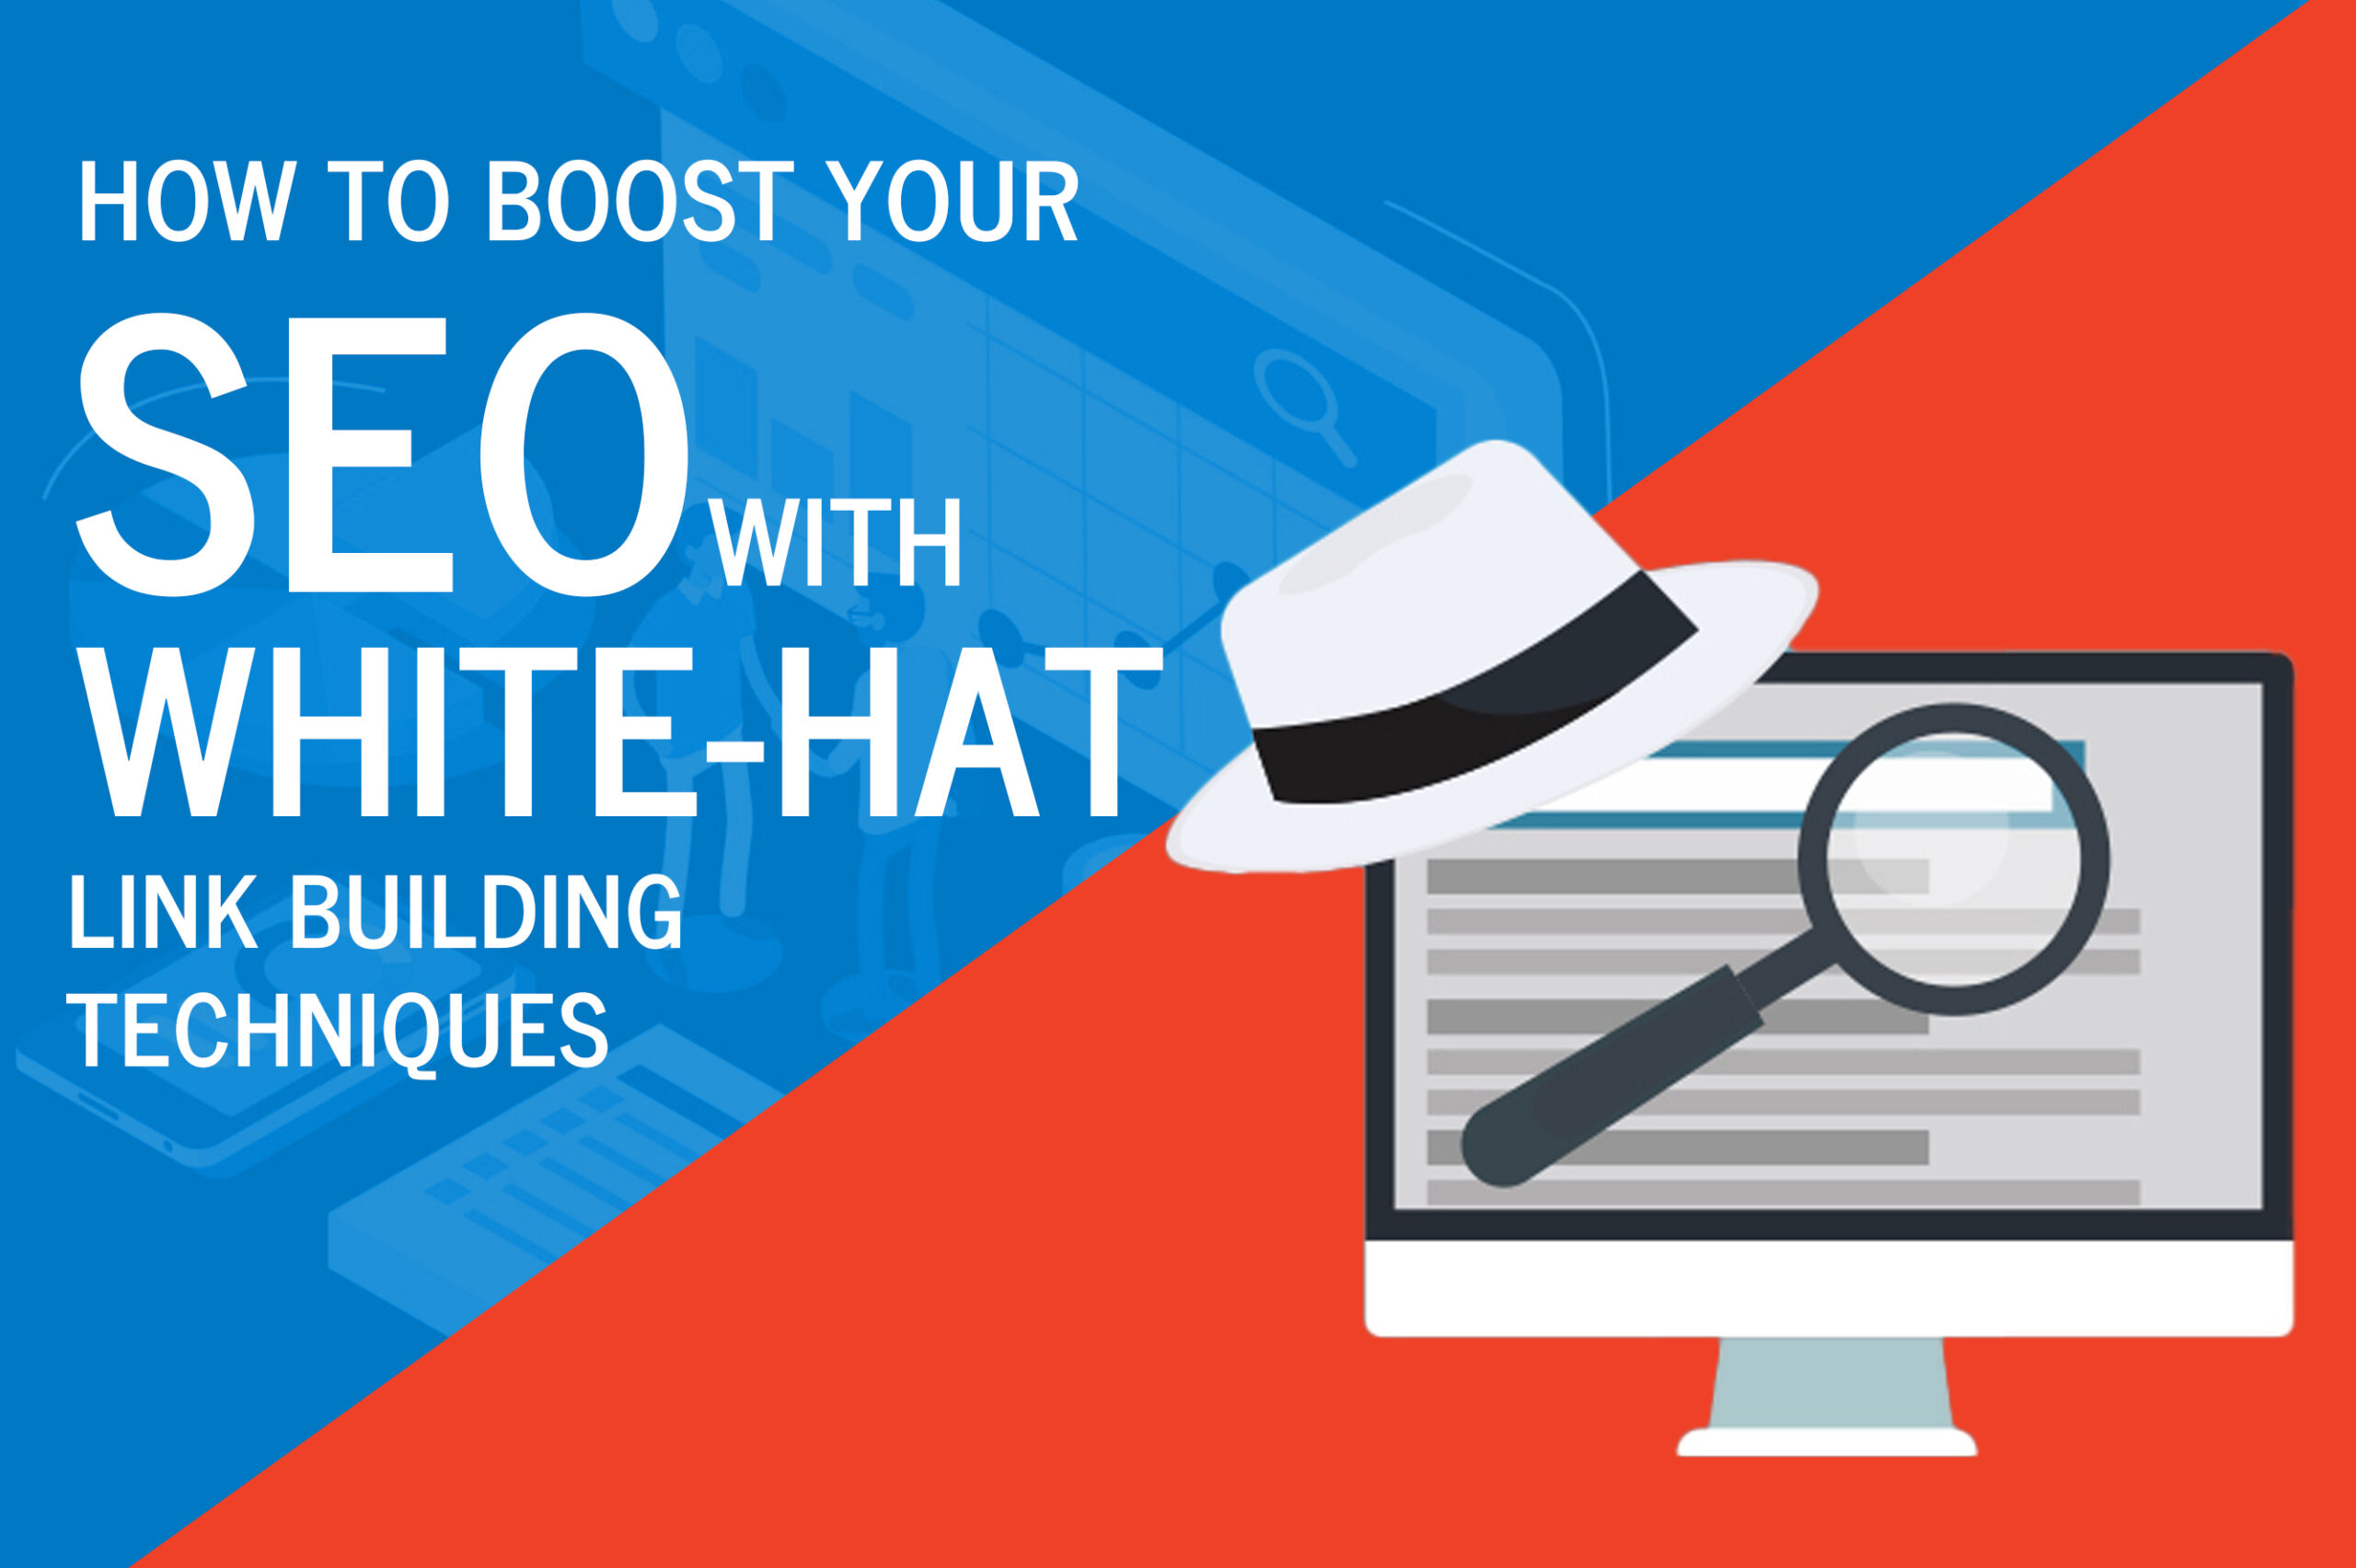 How to Boost Your SEO with White-Hat Link Building Techniques